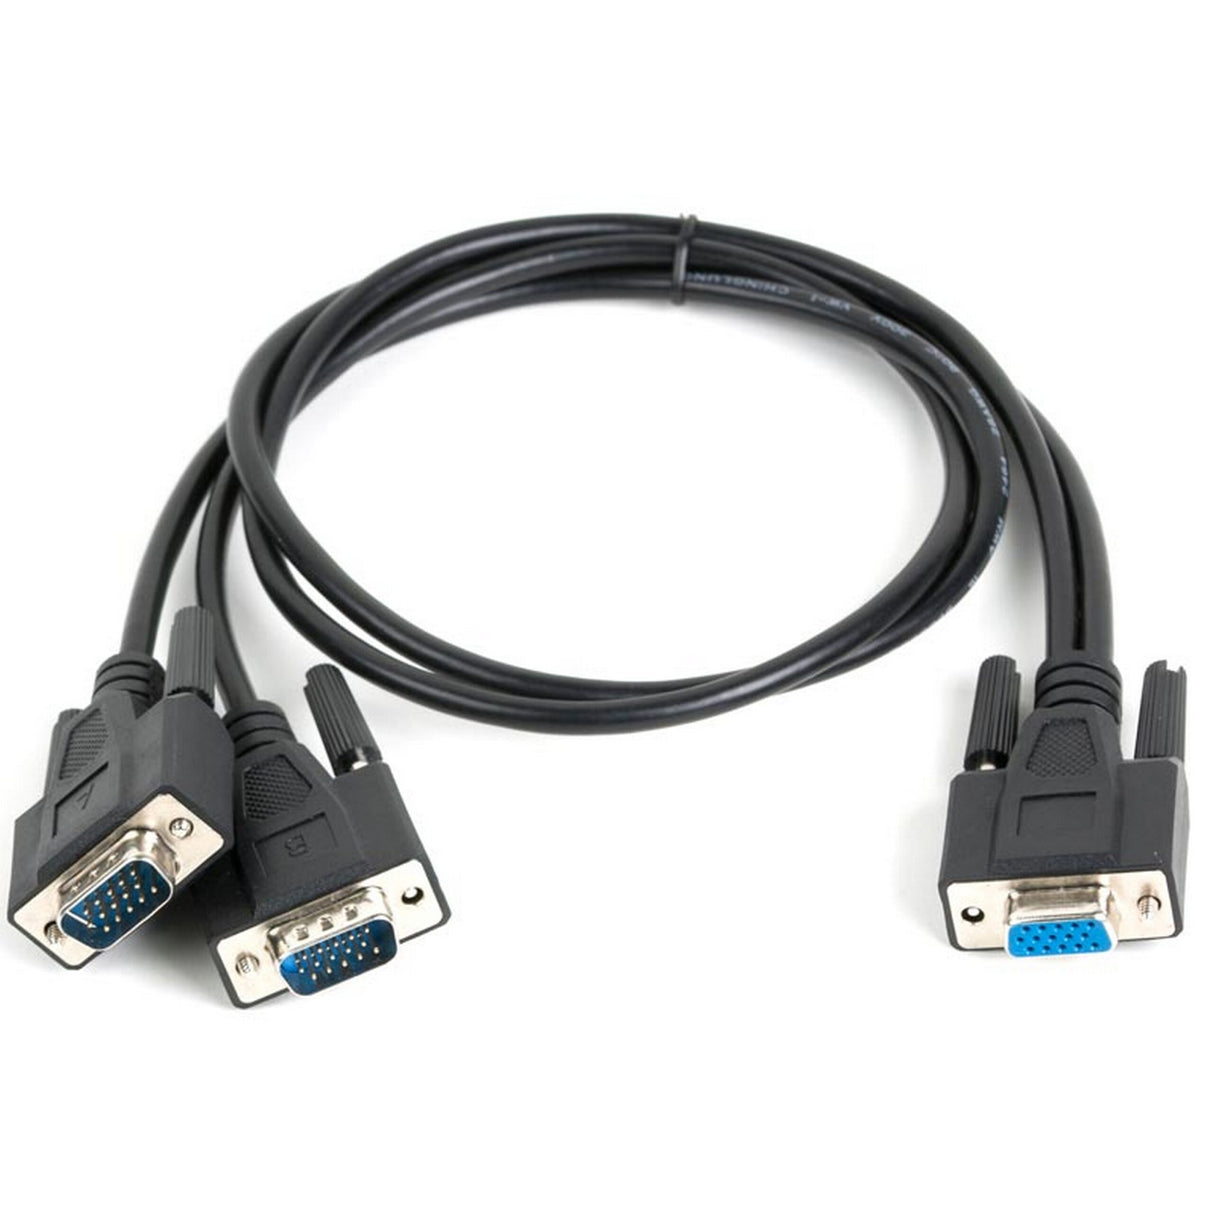 Datavideo CB-59 Tally Cable for SE-1200MU and ITC-100 Connection